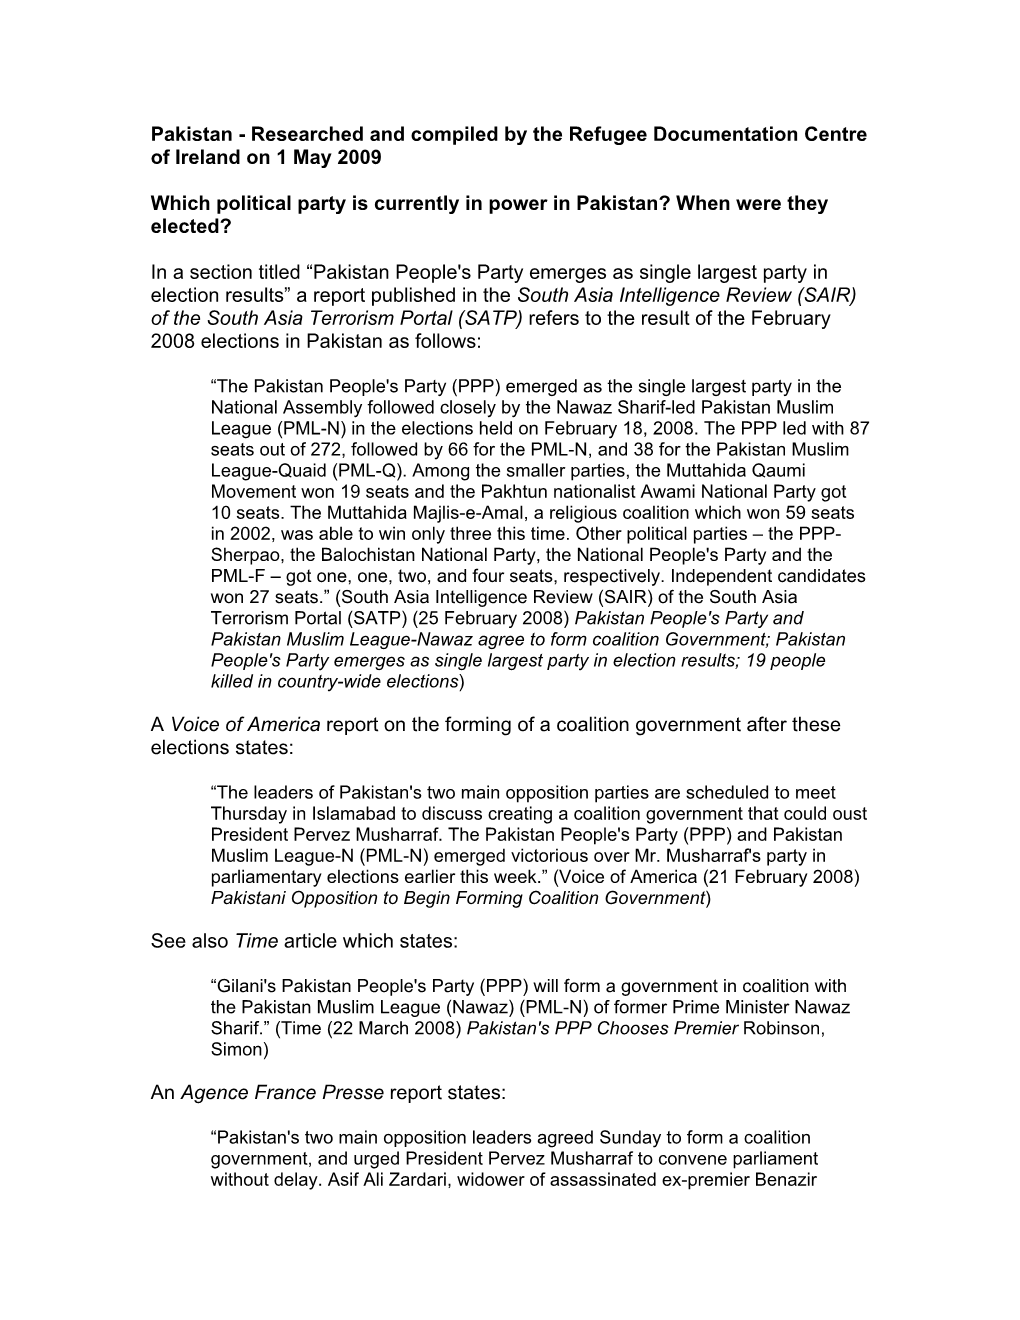 Researched and Compiled by the Refugee Documentation Centre of Ireland on 1 May 2009